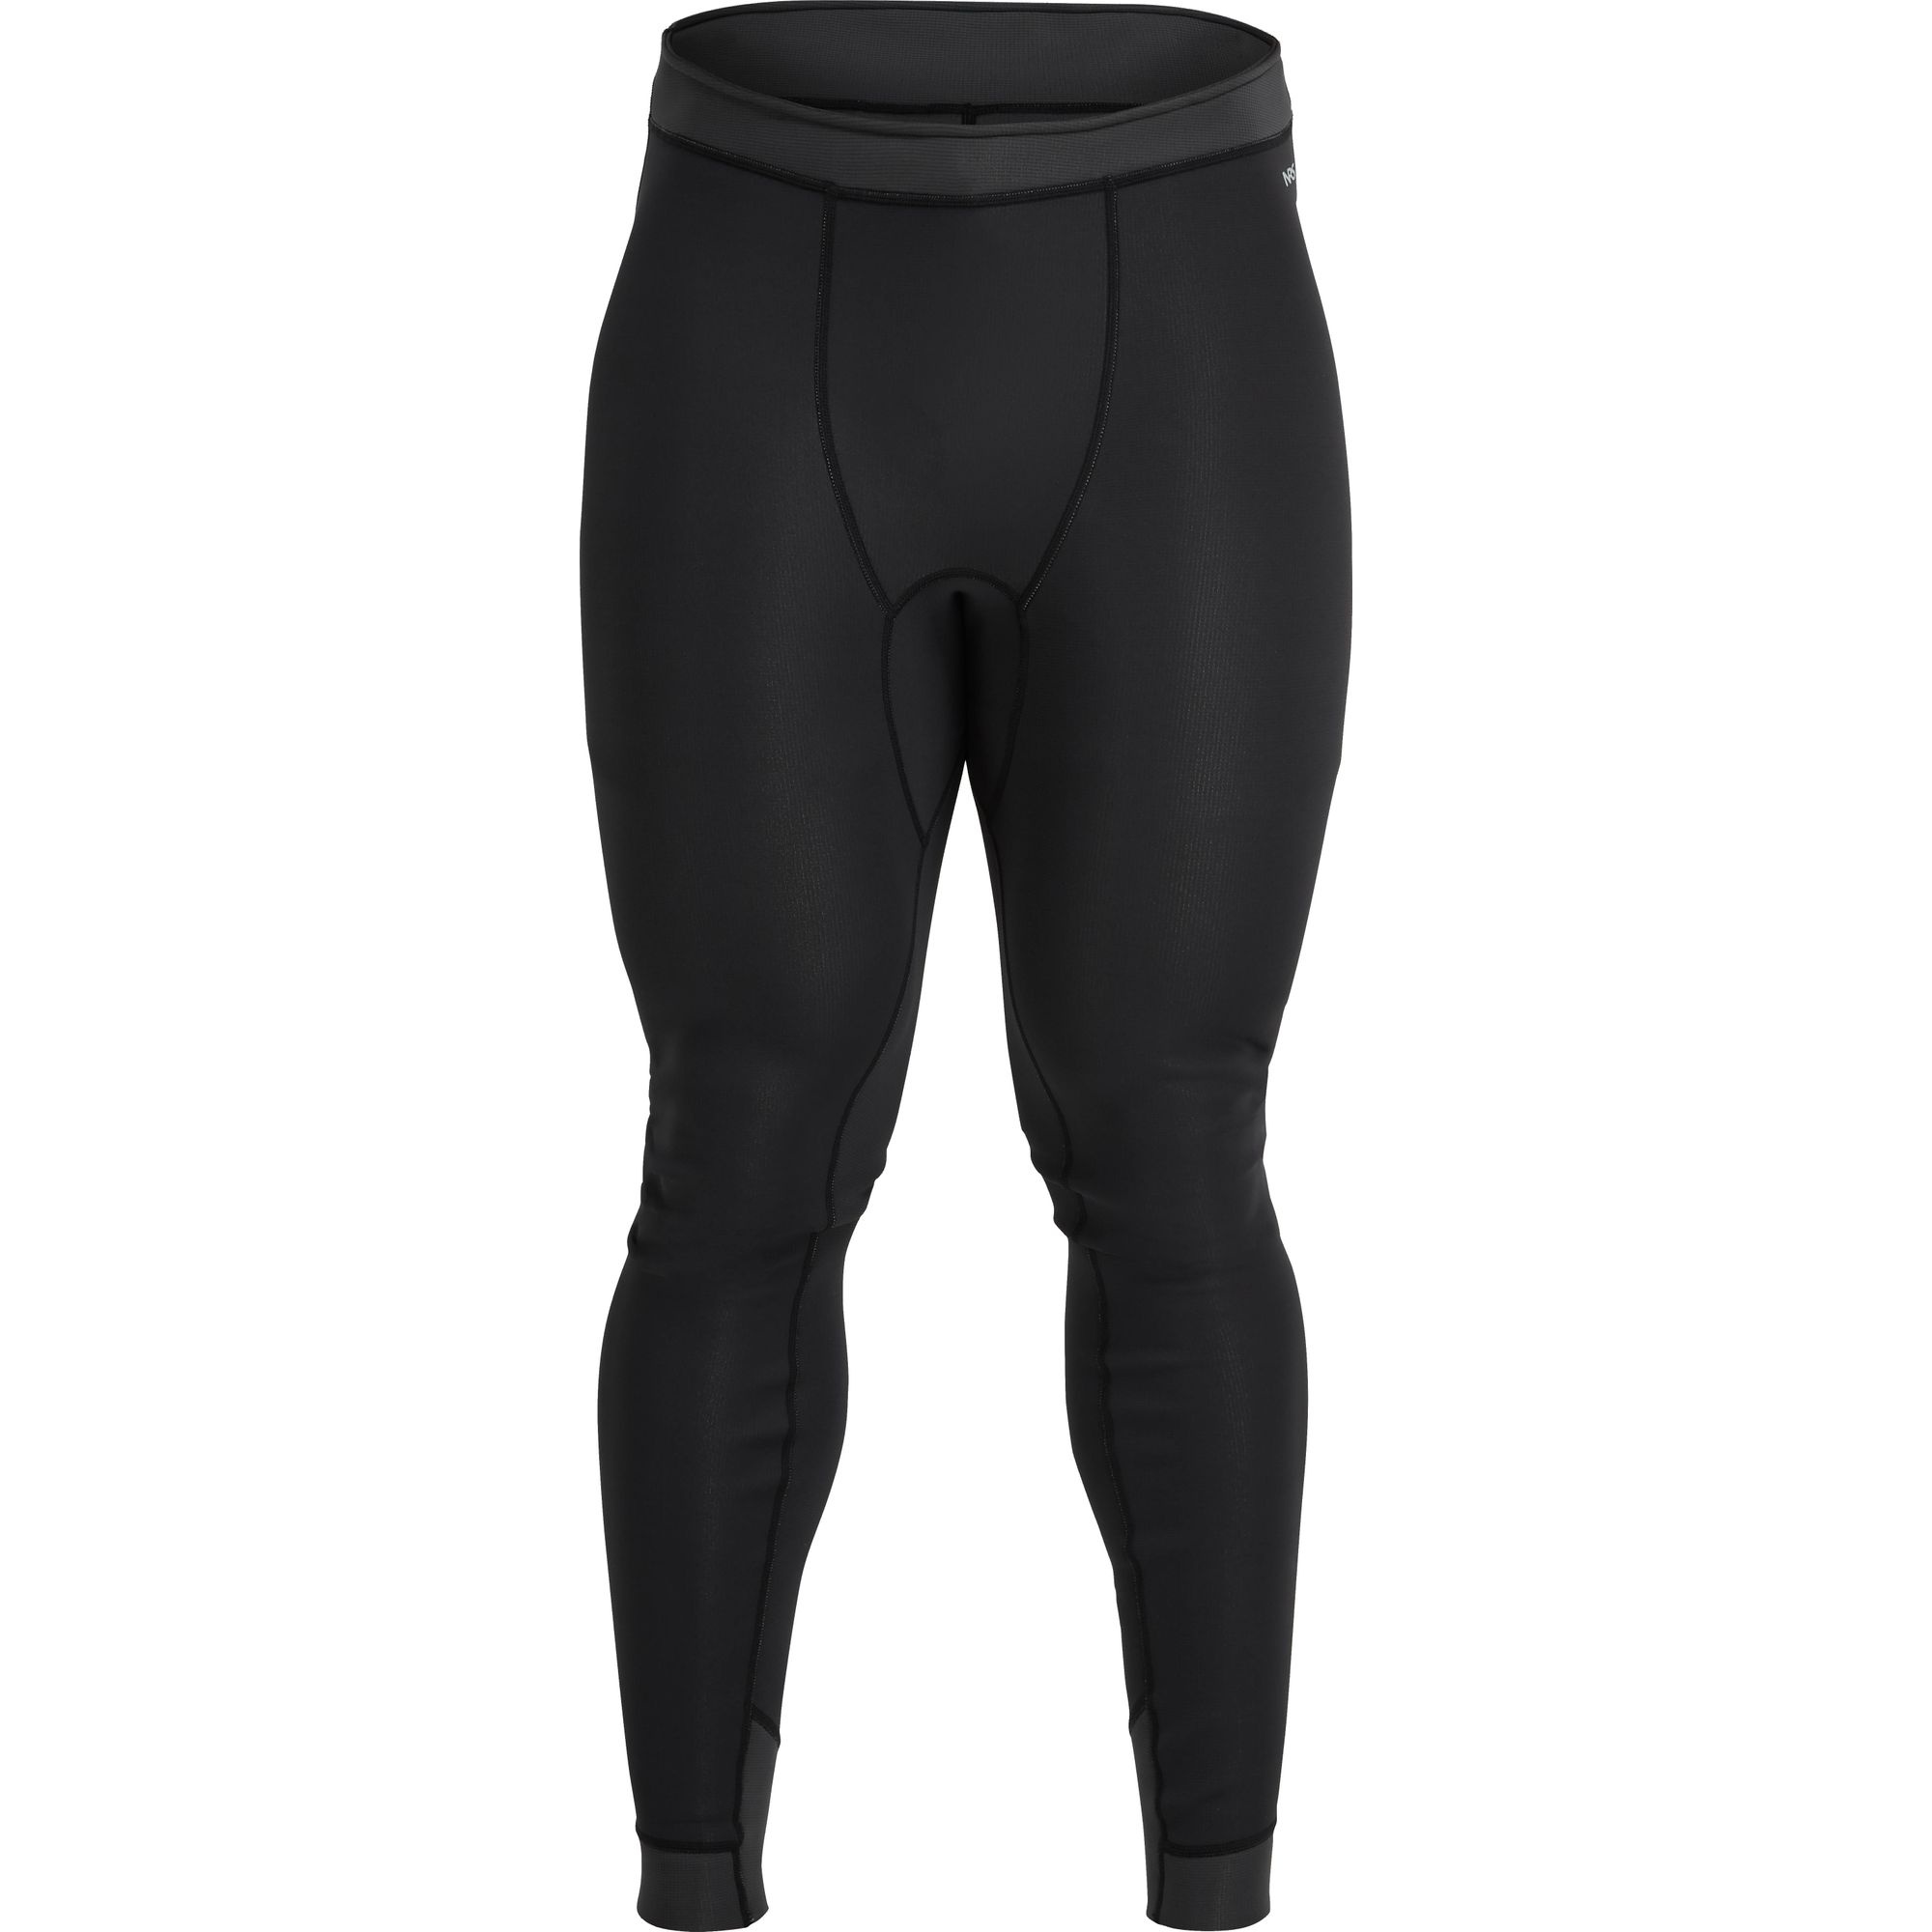 NRS NRS Mens Hydroskin 1.5 Pant